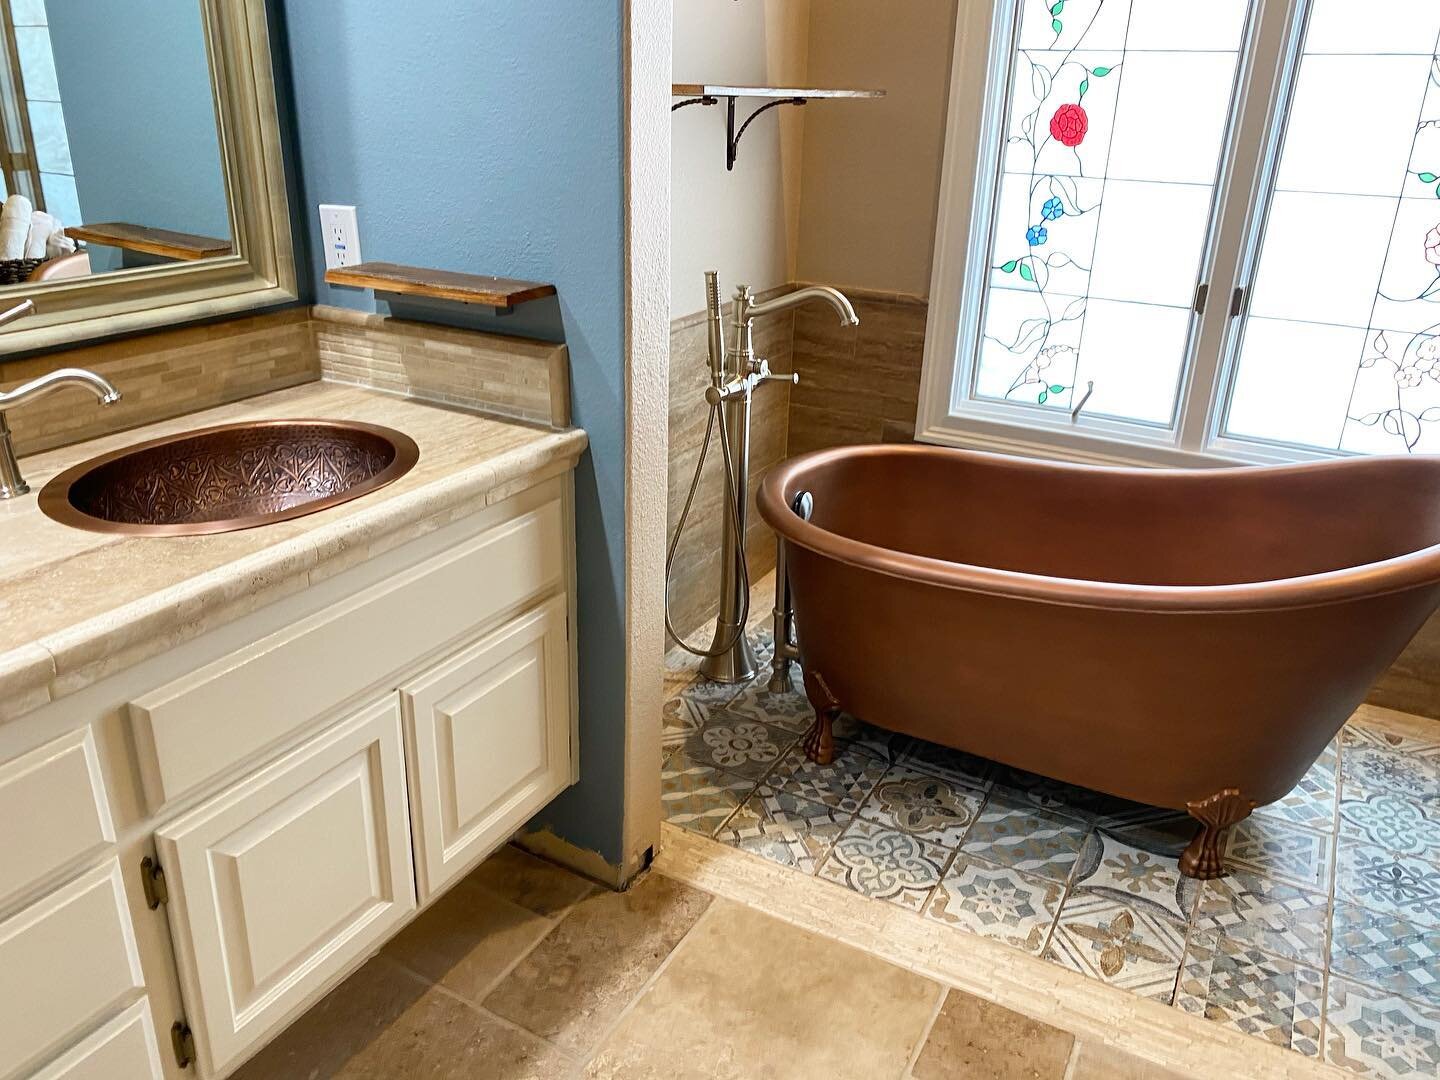 A bathroom remodel in Sand Canyon we did earlier this year for a returning client. The freestanding copper tub was a beautiful centerpiece. #h2oconstruction  #remodel #bathroom #santaclarita #construction #residential